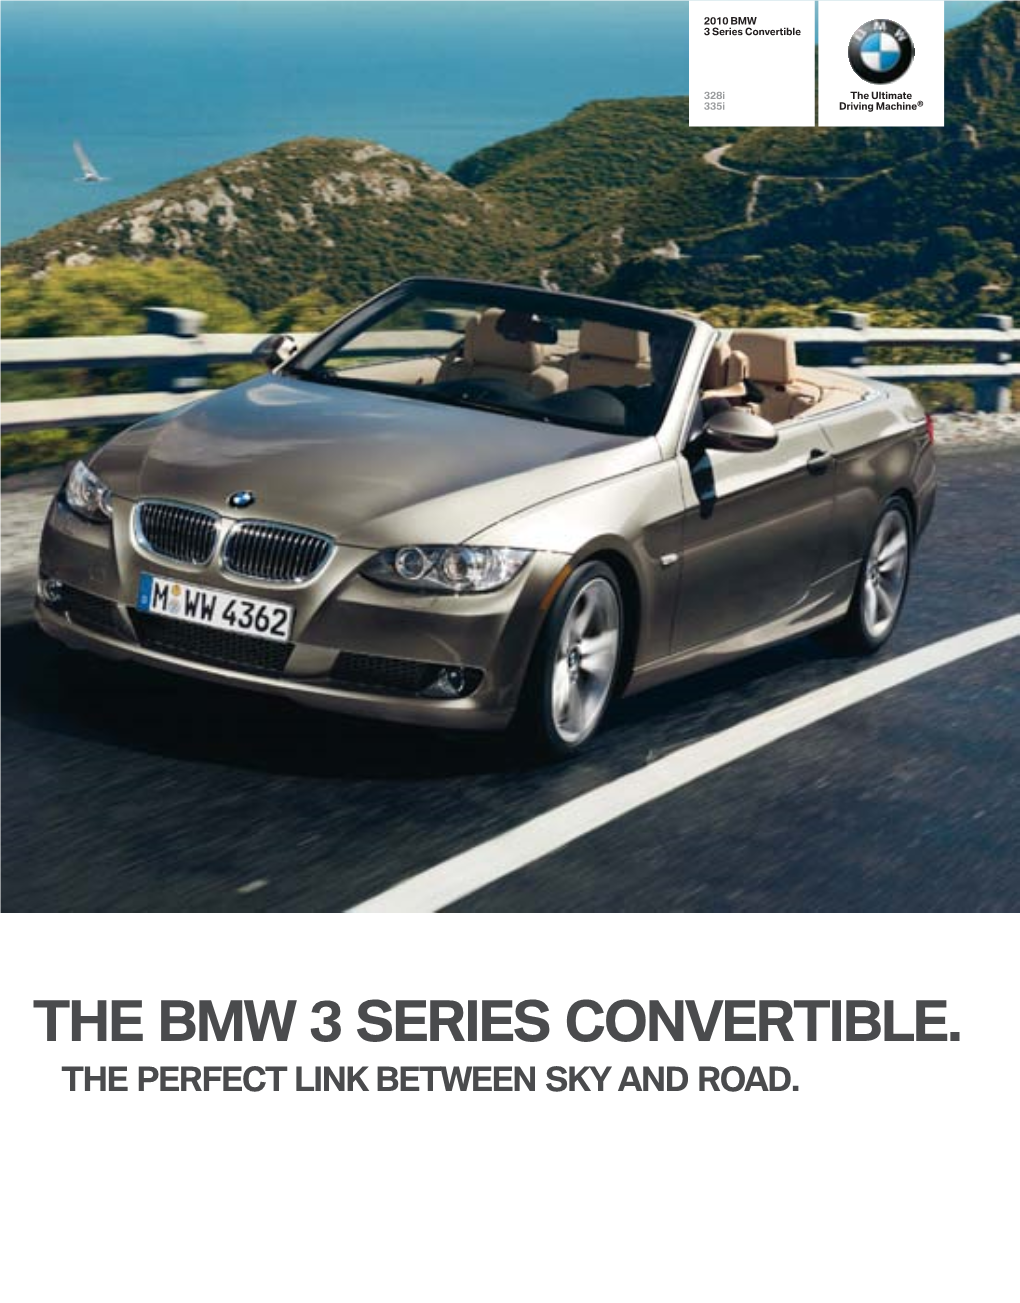 The Bmw 3 Series Convertible. the Perfect Link Between Sky and Road